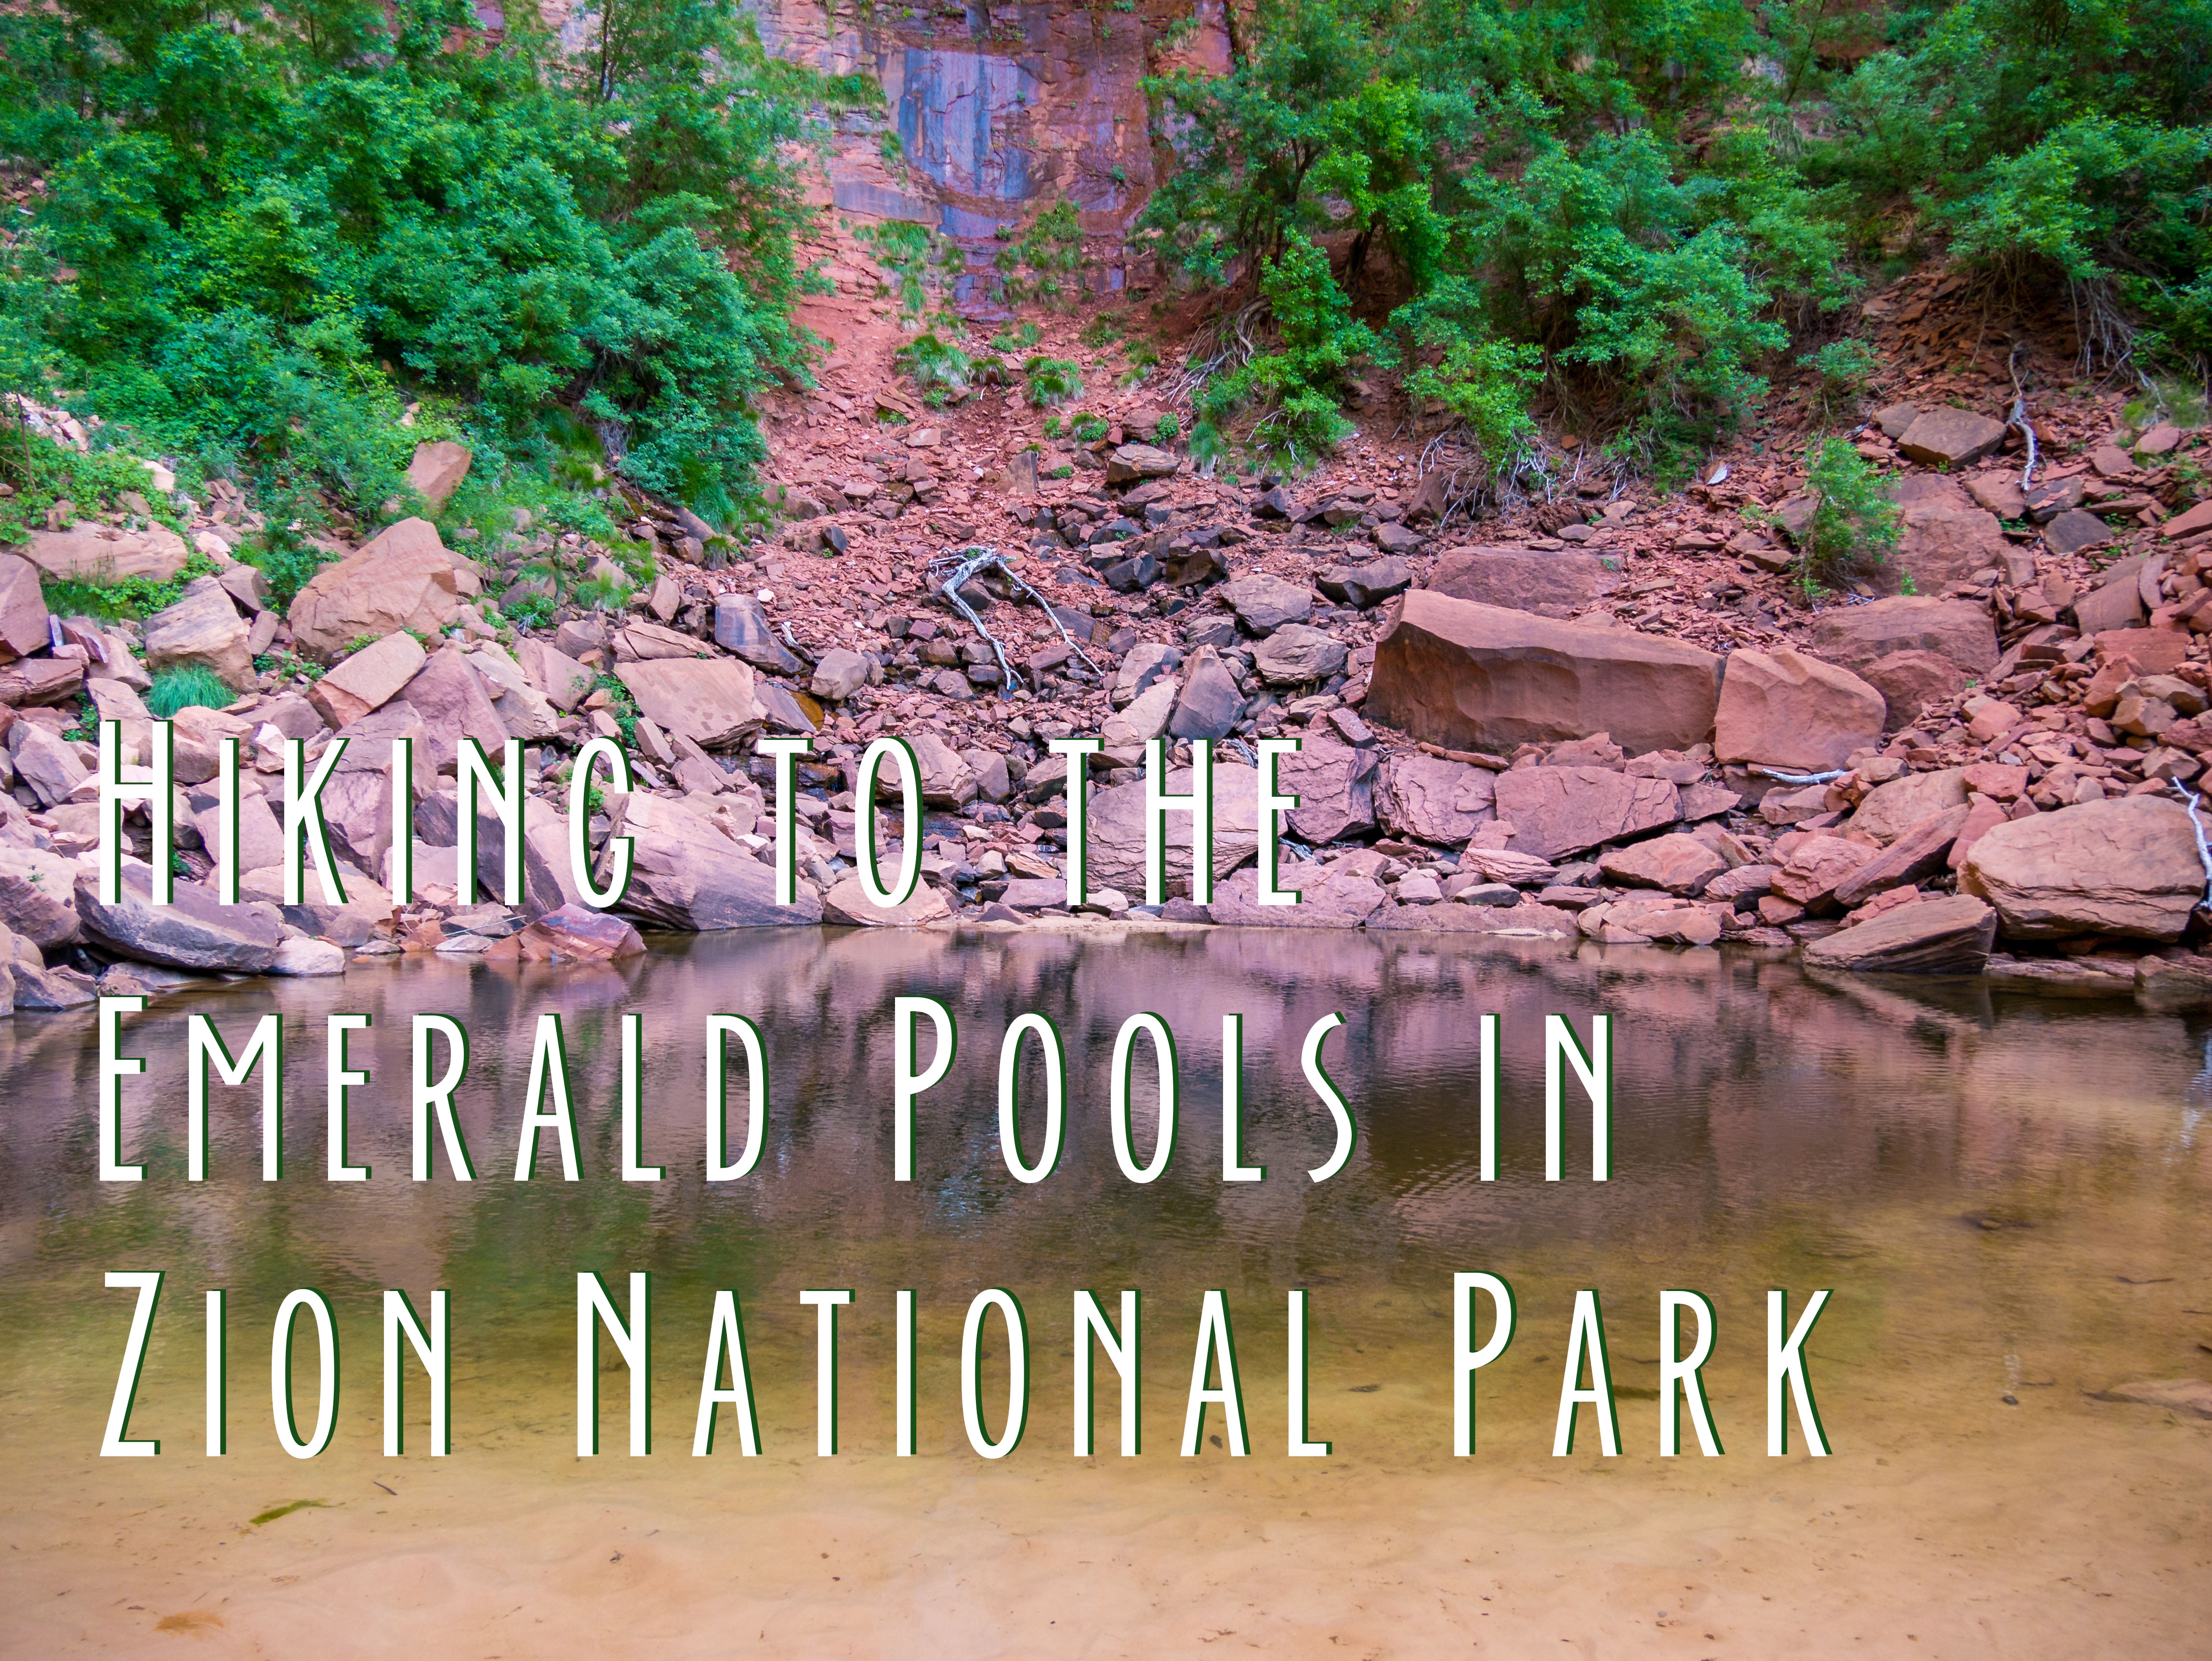 Title Card for the Emerald Pools in Zion National Park showing the upper pool